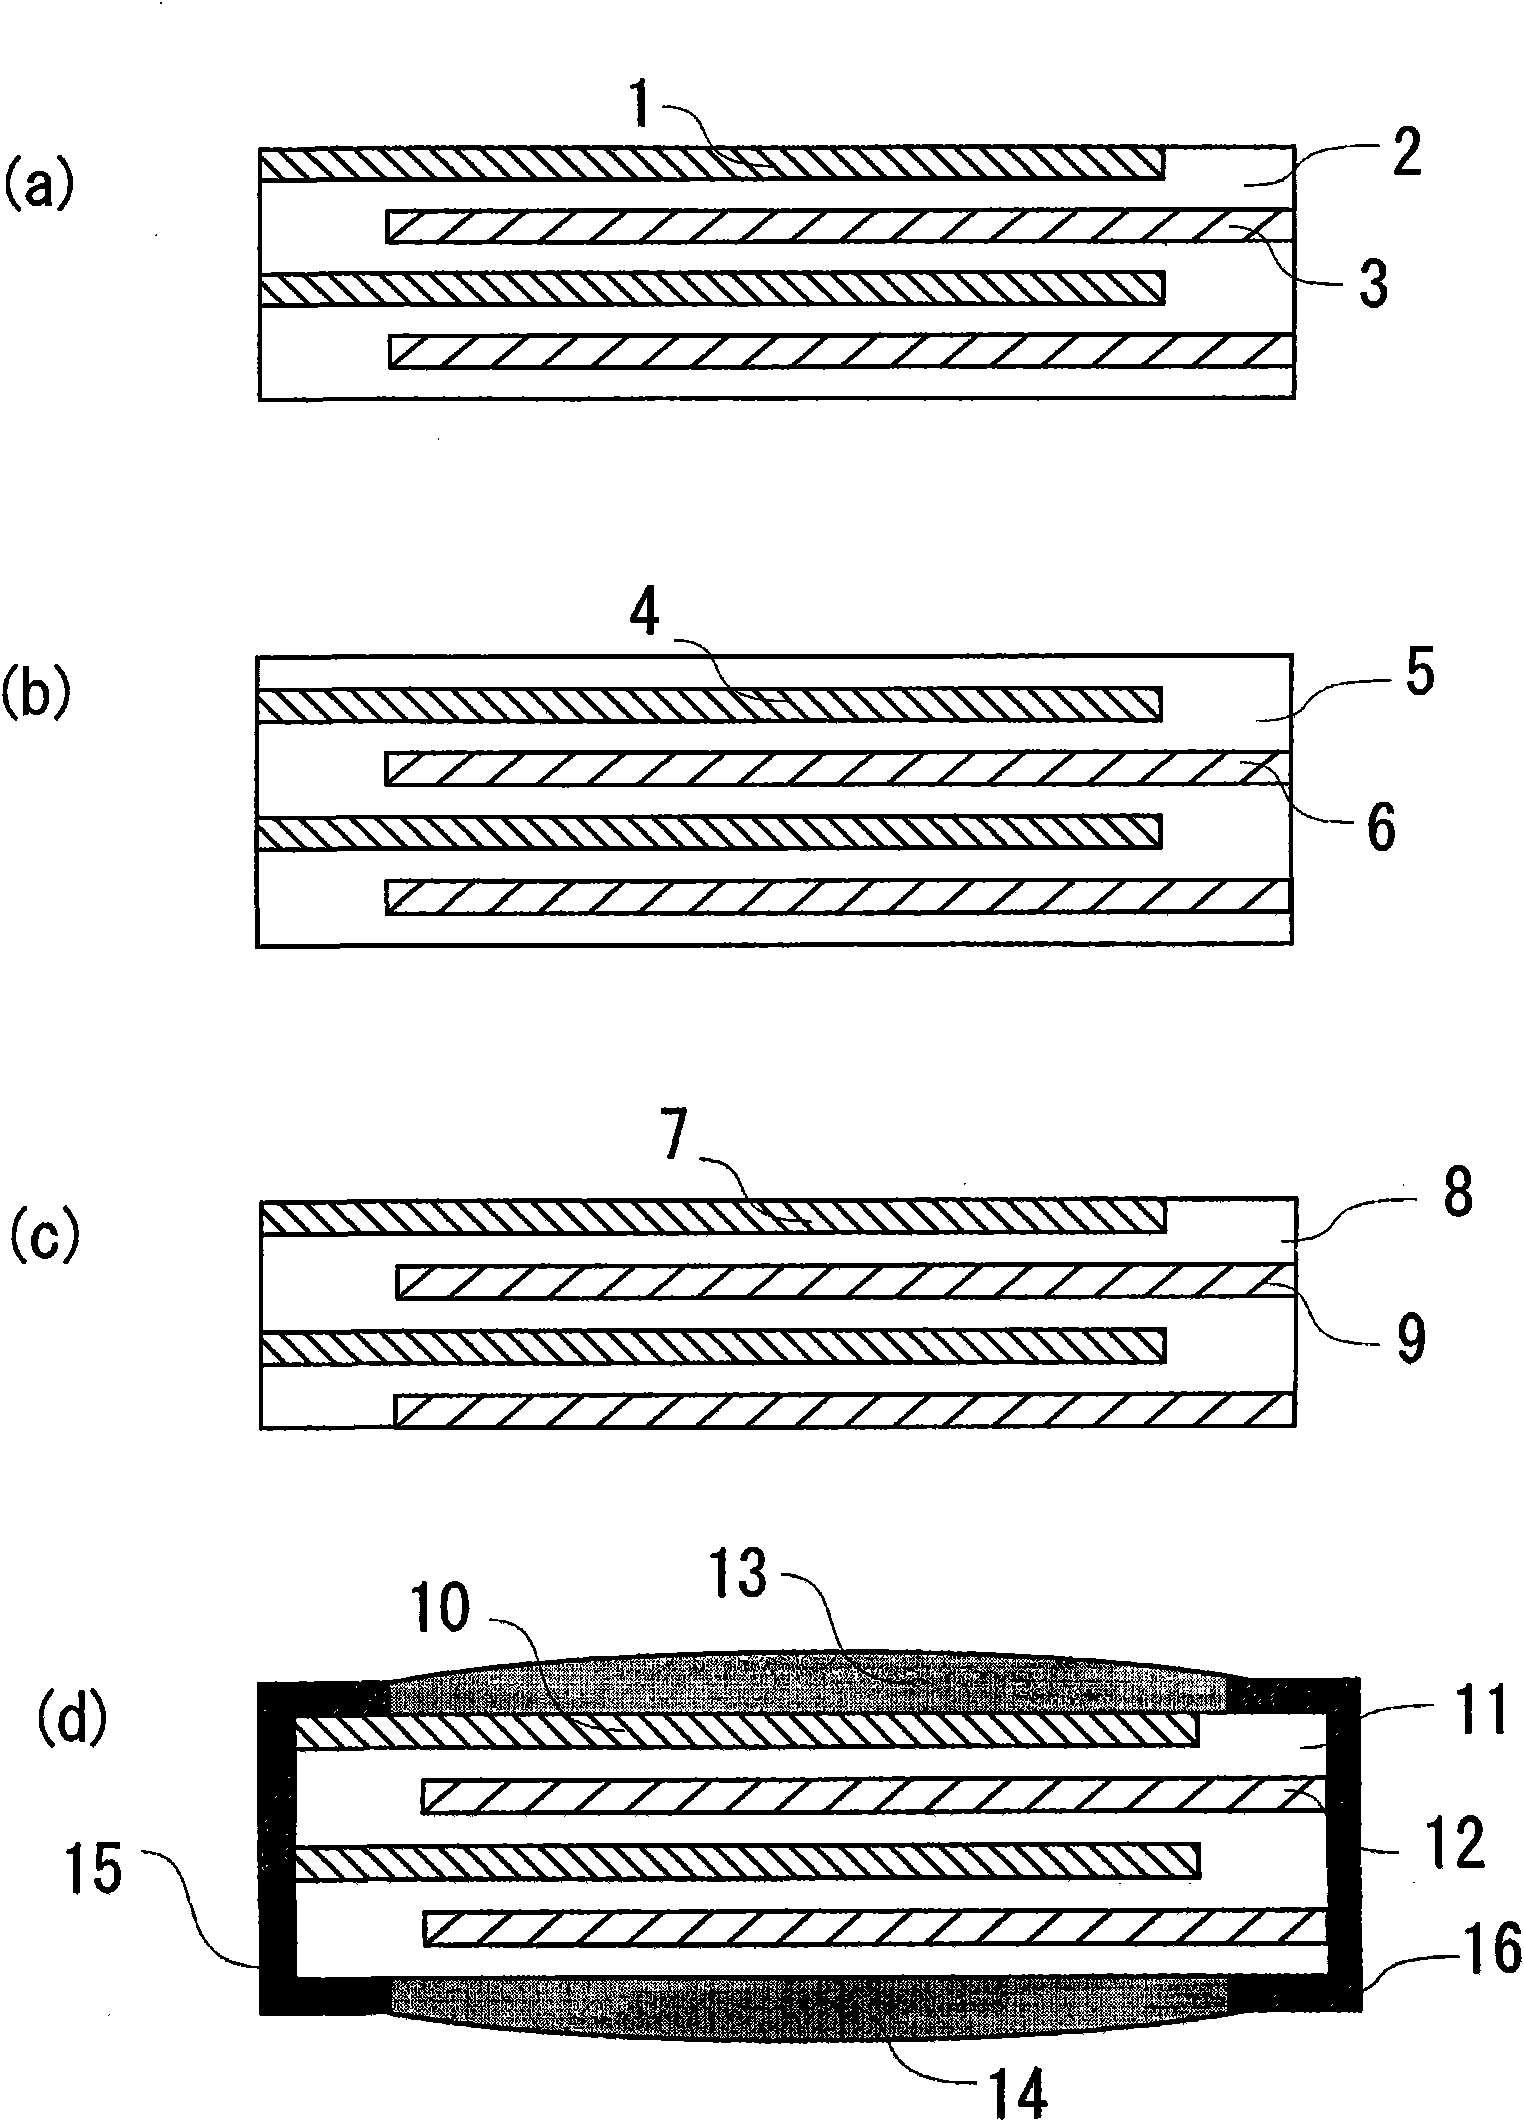 Lithium ion rechargeable battery and process for poducing the rechargeable battery